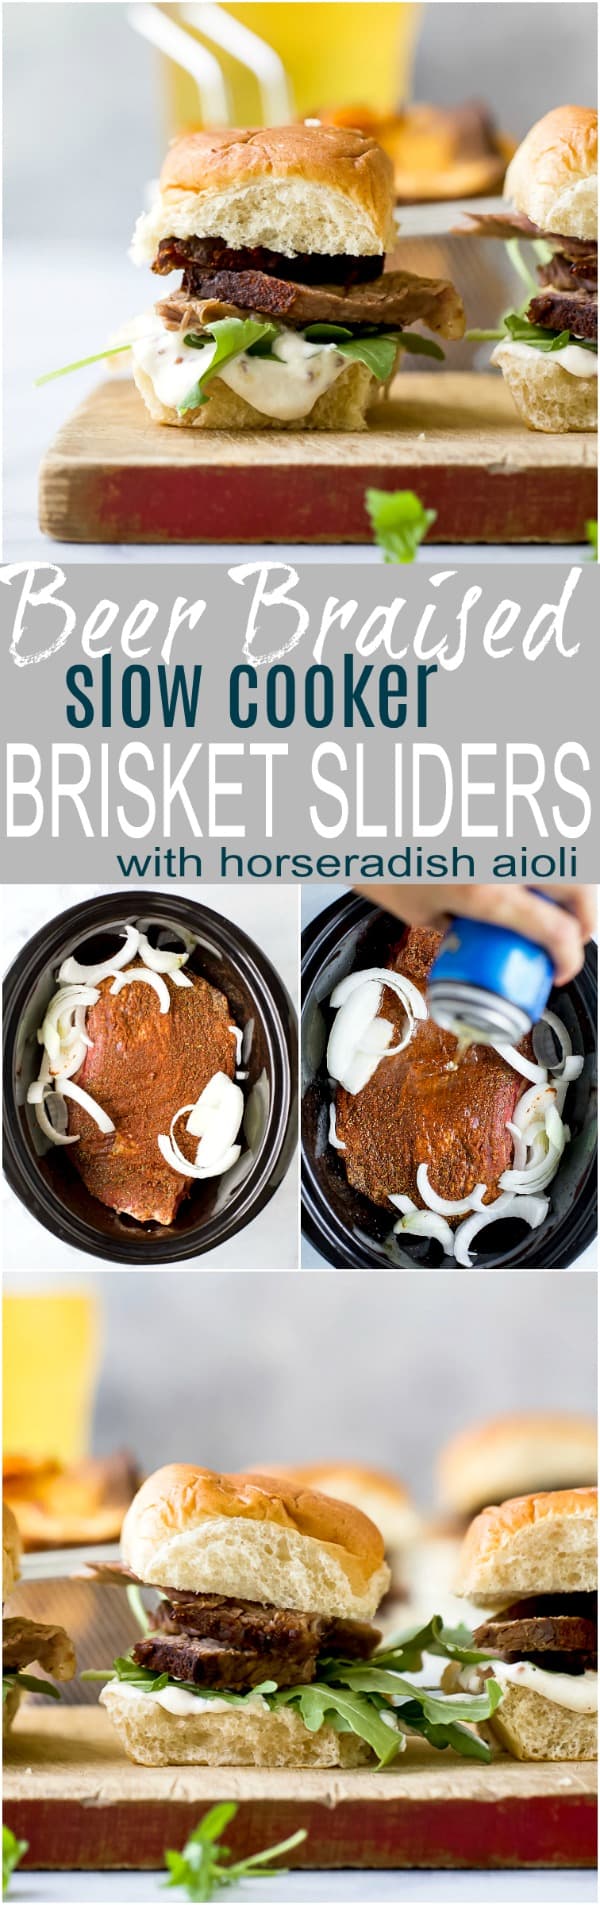 Title Image for Beer Braised Slow Cooker Brisket Sliders with horseradish aioli